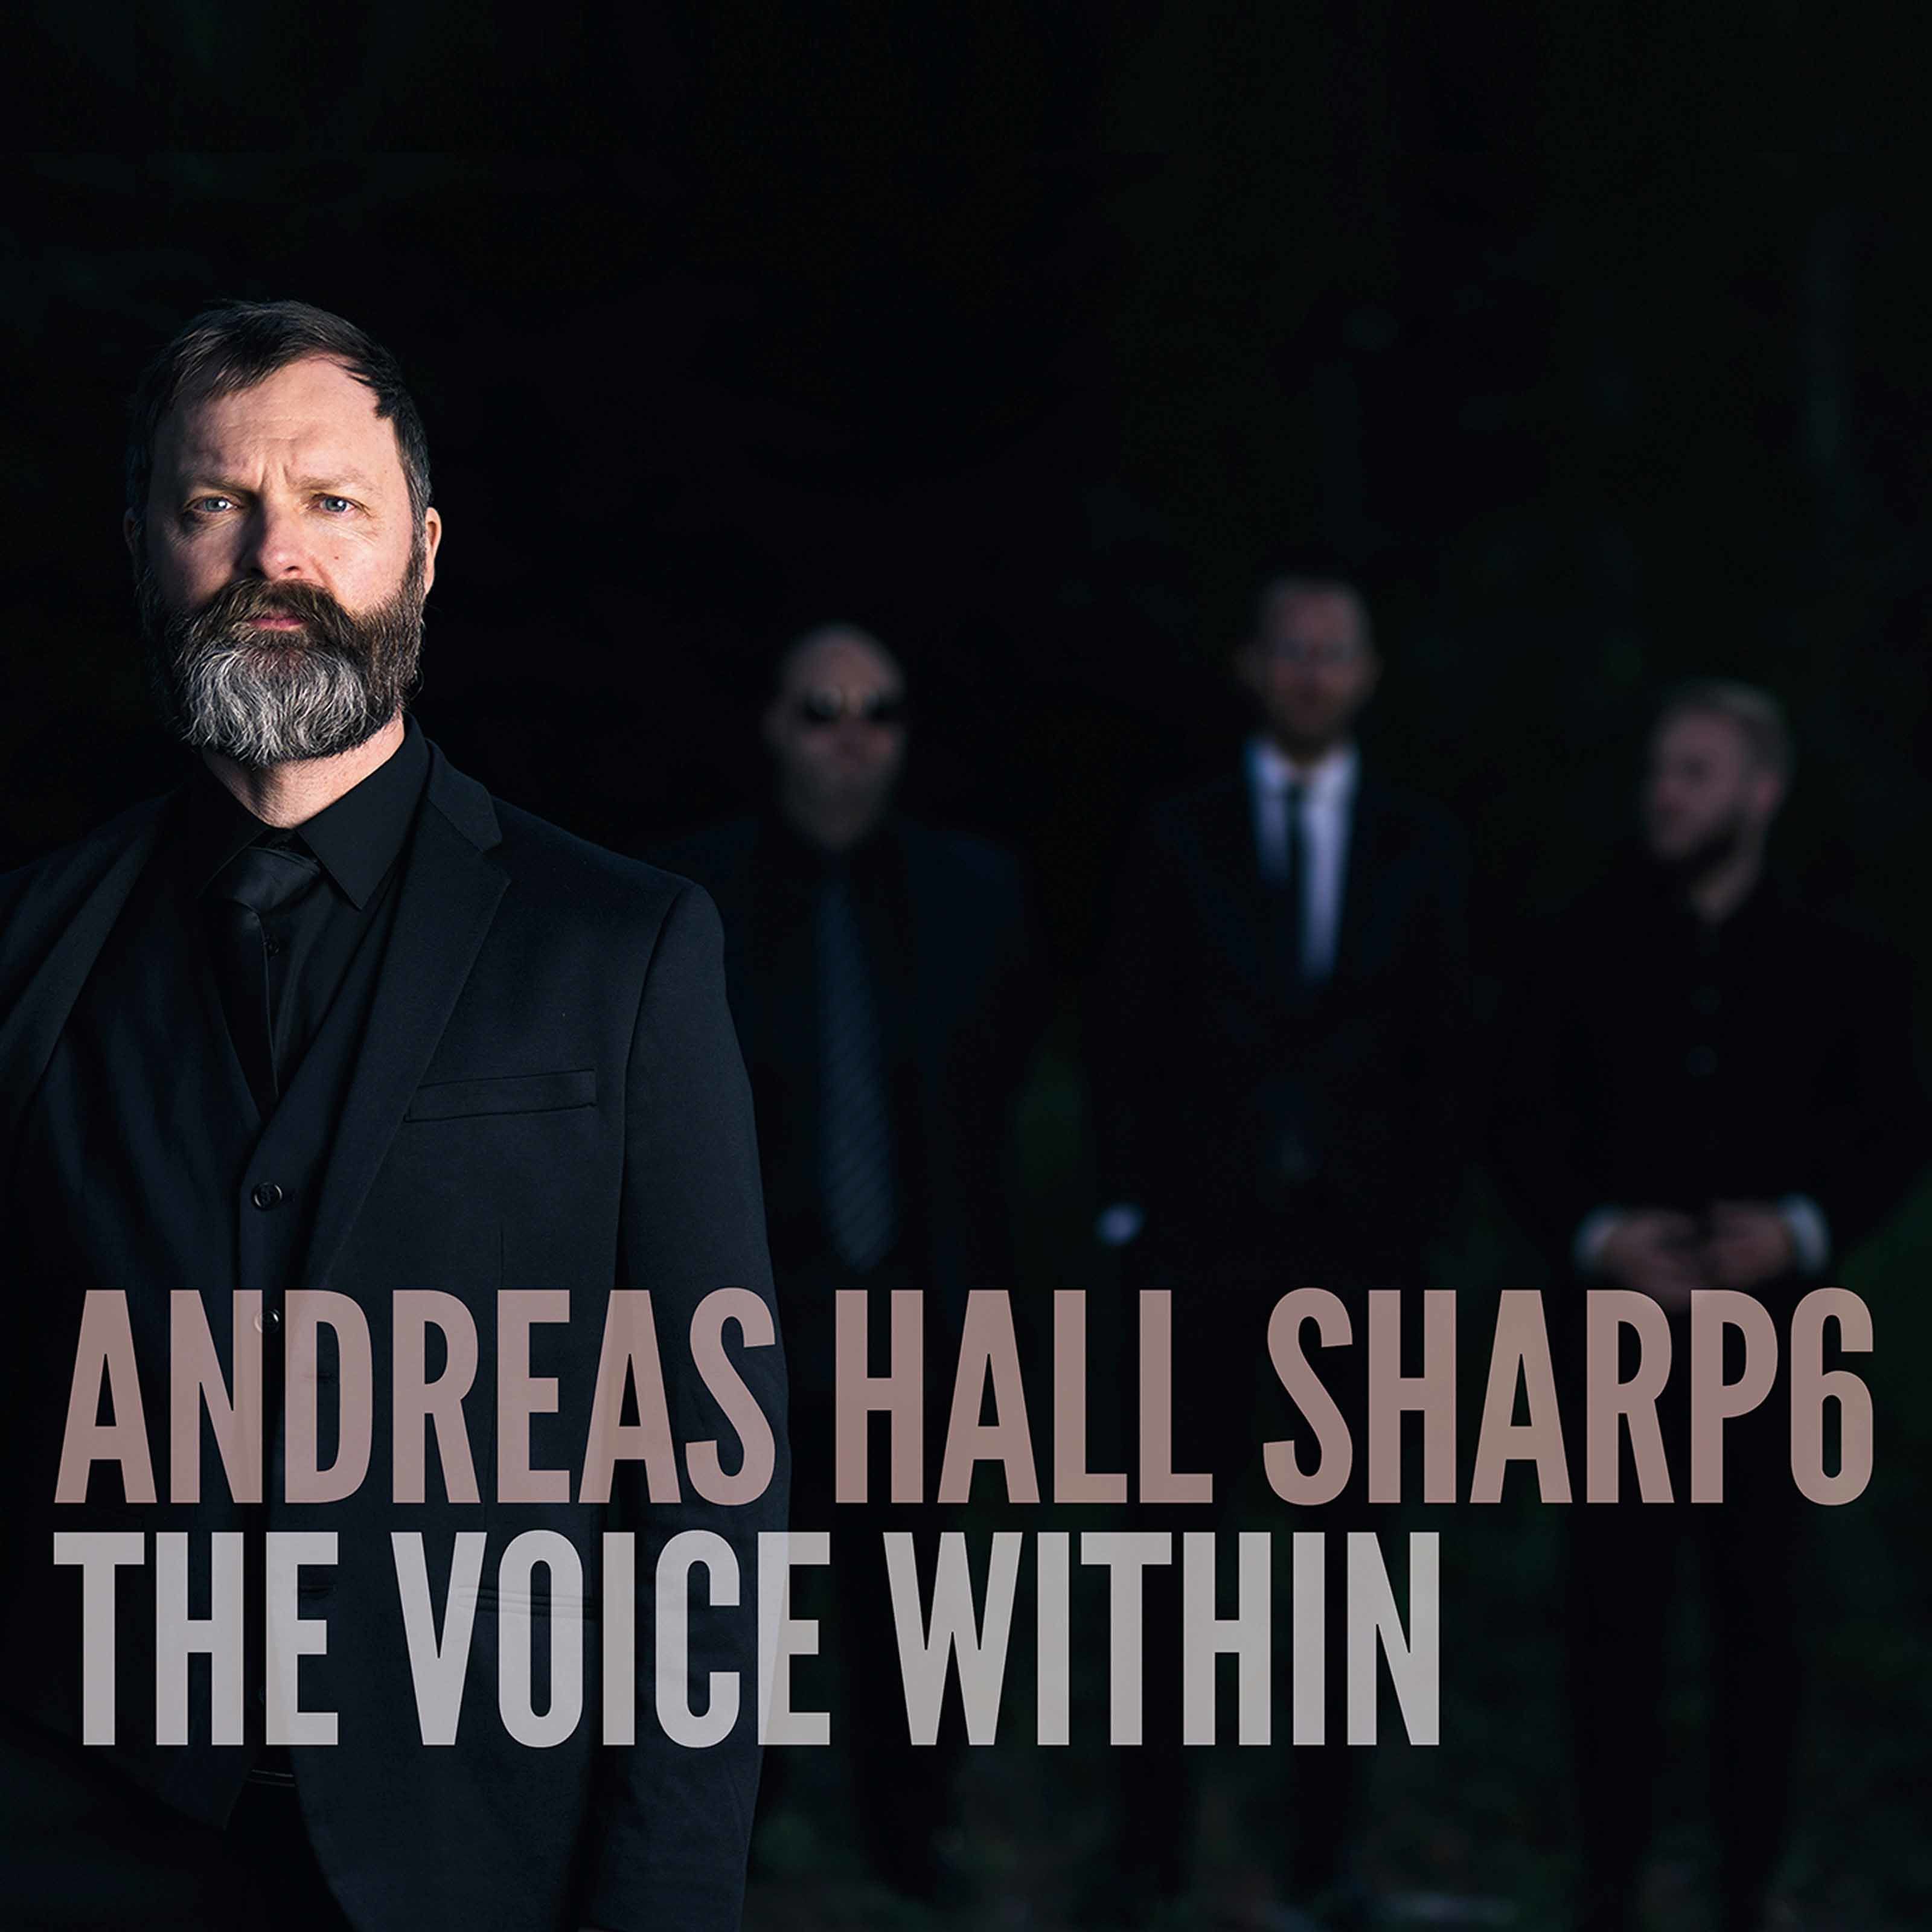 Andreas Hall Sharp6 – The Voice Within (2020) [FLAC 24bit/96kHz]